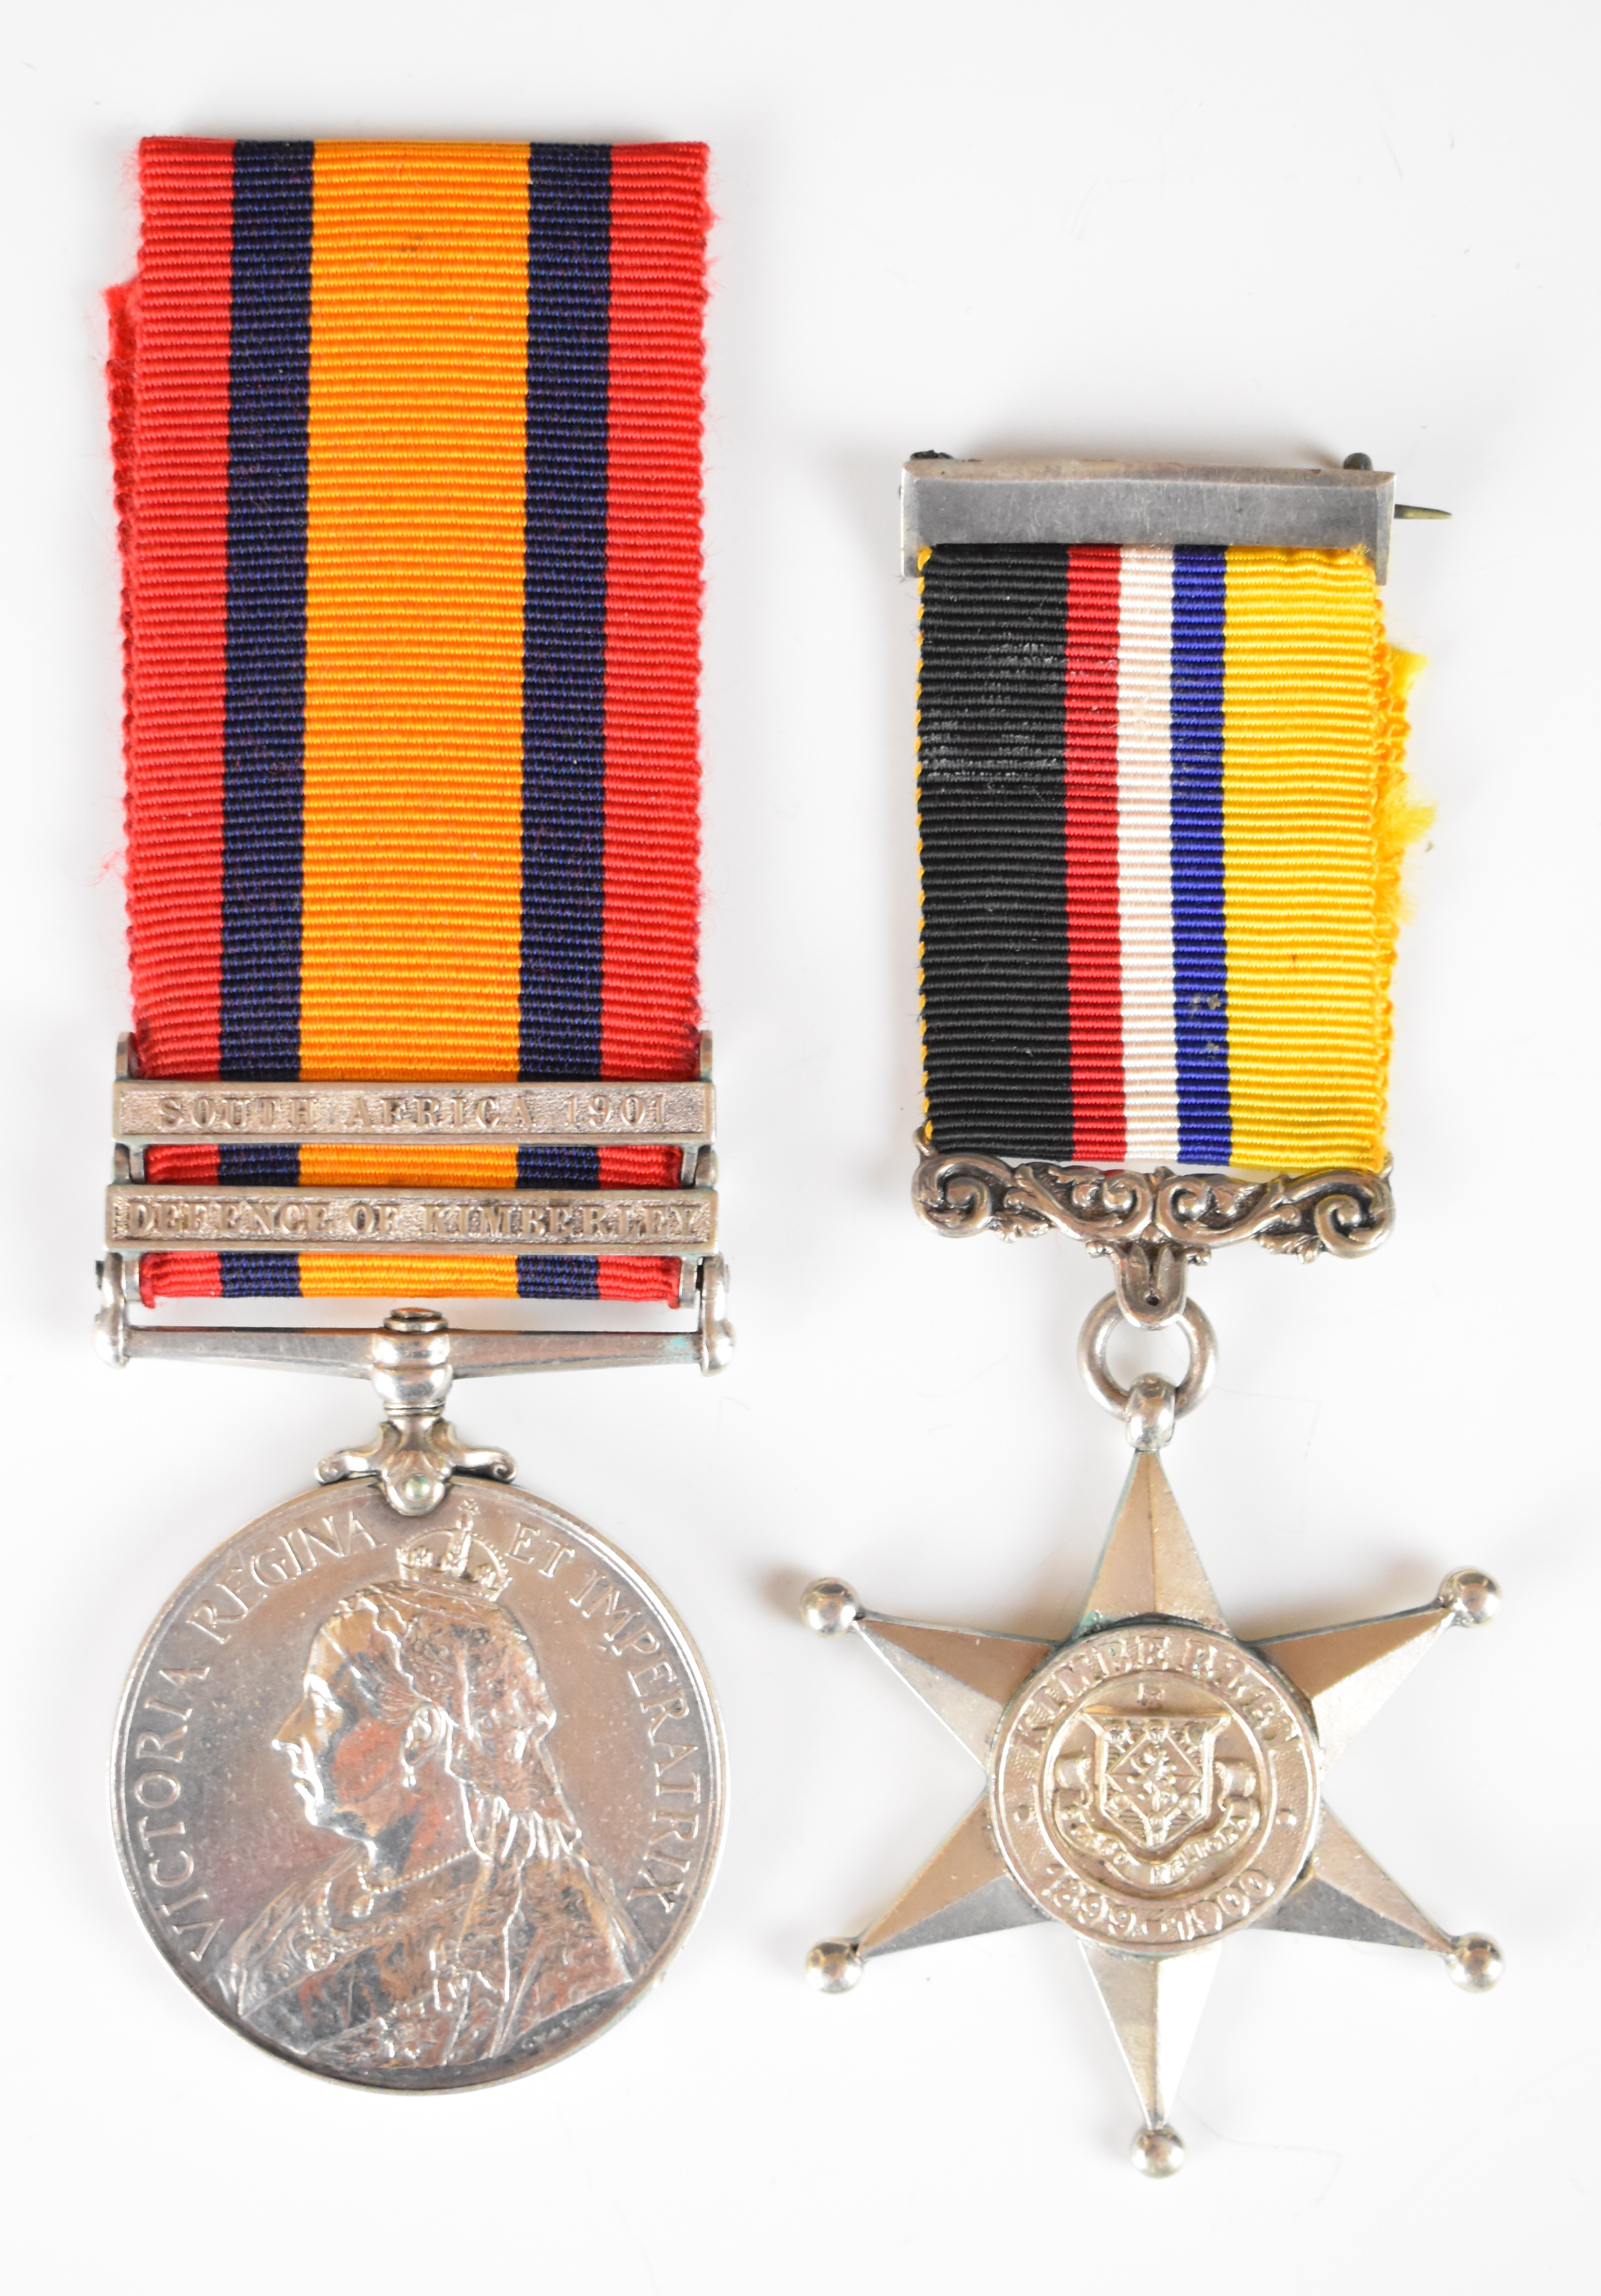 Queen's South Africa Medal with clasps for Defence of Kimberley and South Africa 1901 named to 828